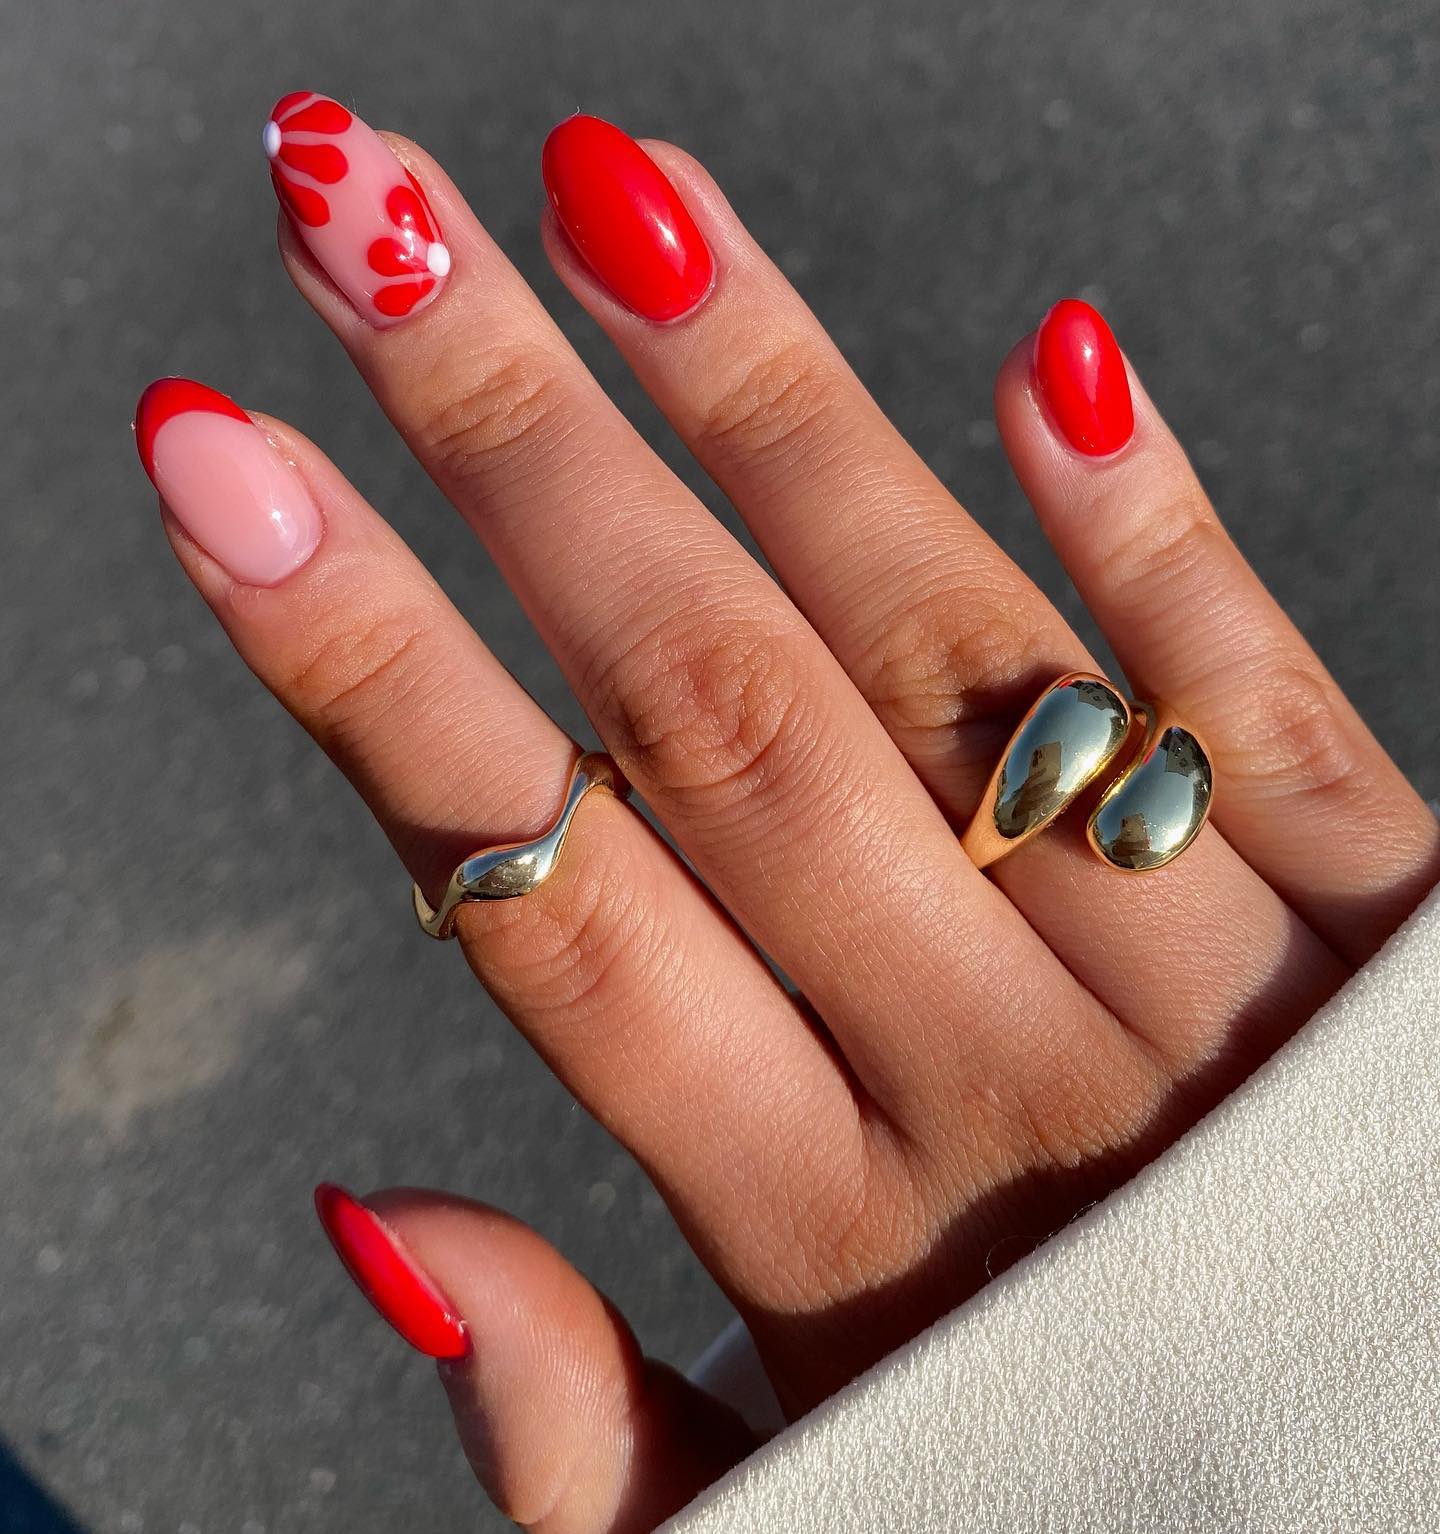 30+ Dotted Nails For a Seriously Eye-Catching Manicure